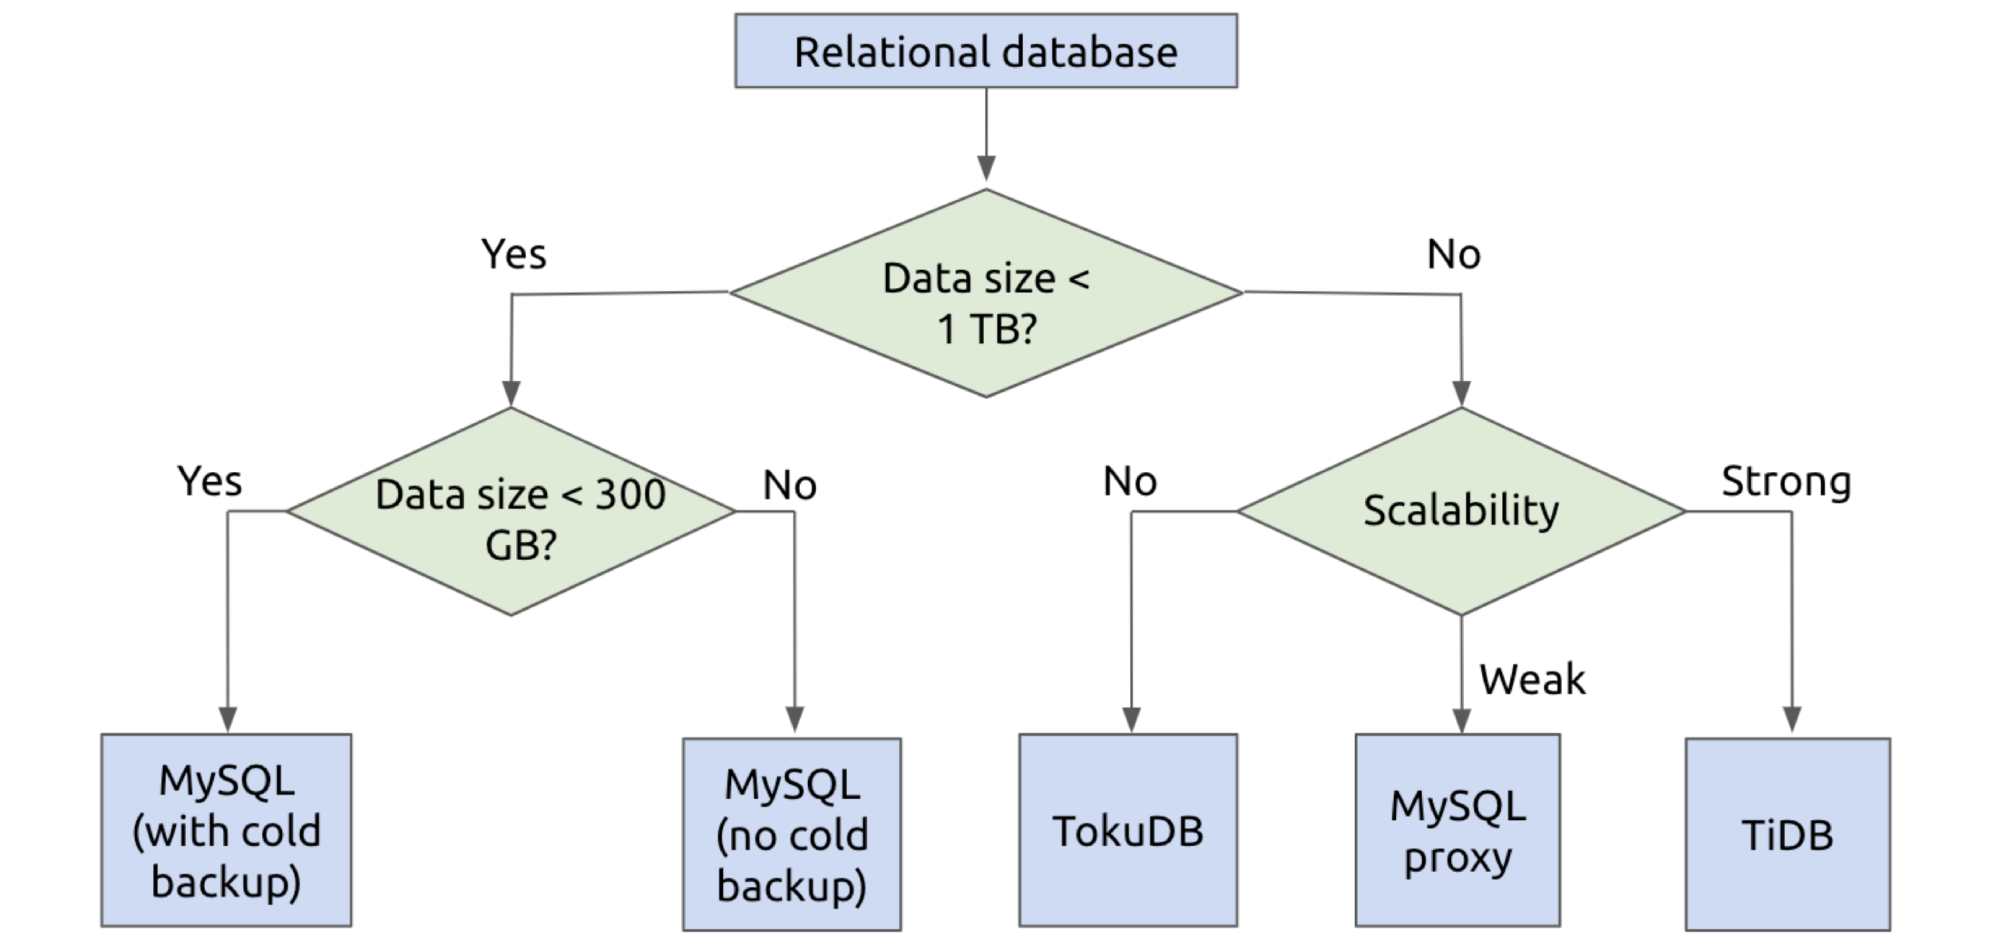 Efficiently choosing a relational database